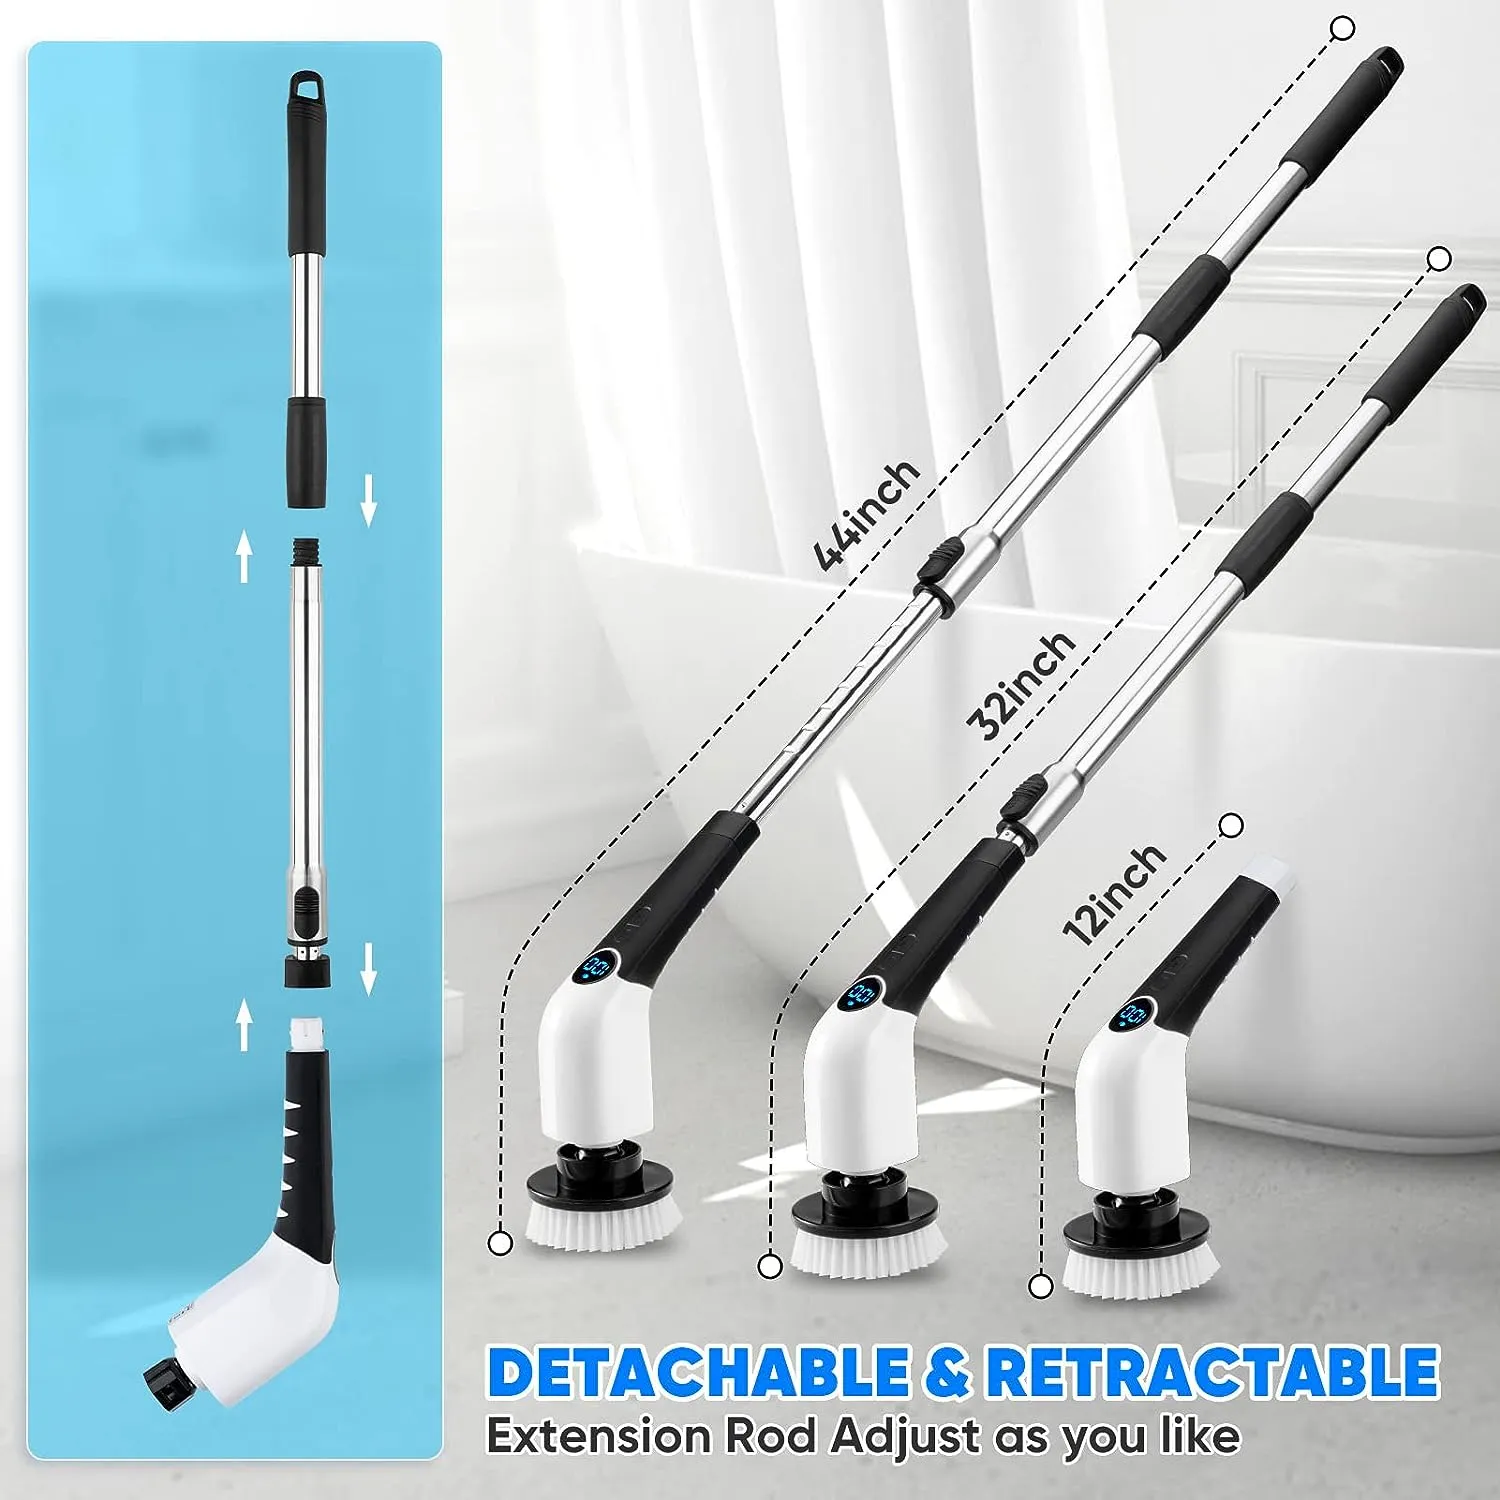 Kimistore1 Cordless Electric Spin Scrubber Portable Extendable Cleaning  Brush For Floor/Tile With 3 Adjustable Extension And Long Handle From  Kimistore, $41.21